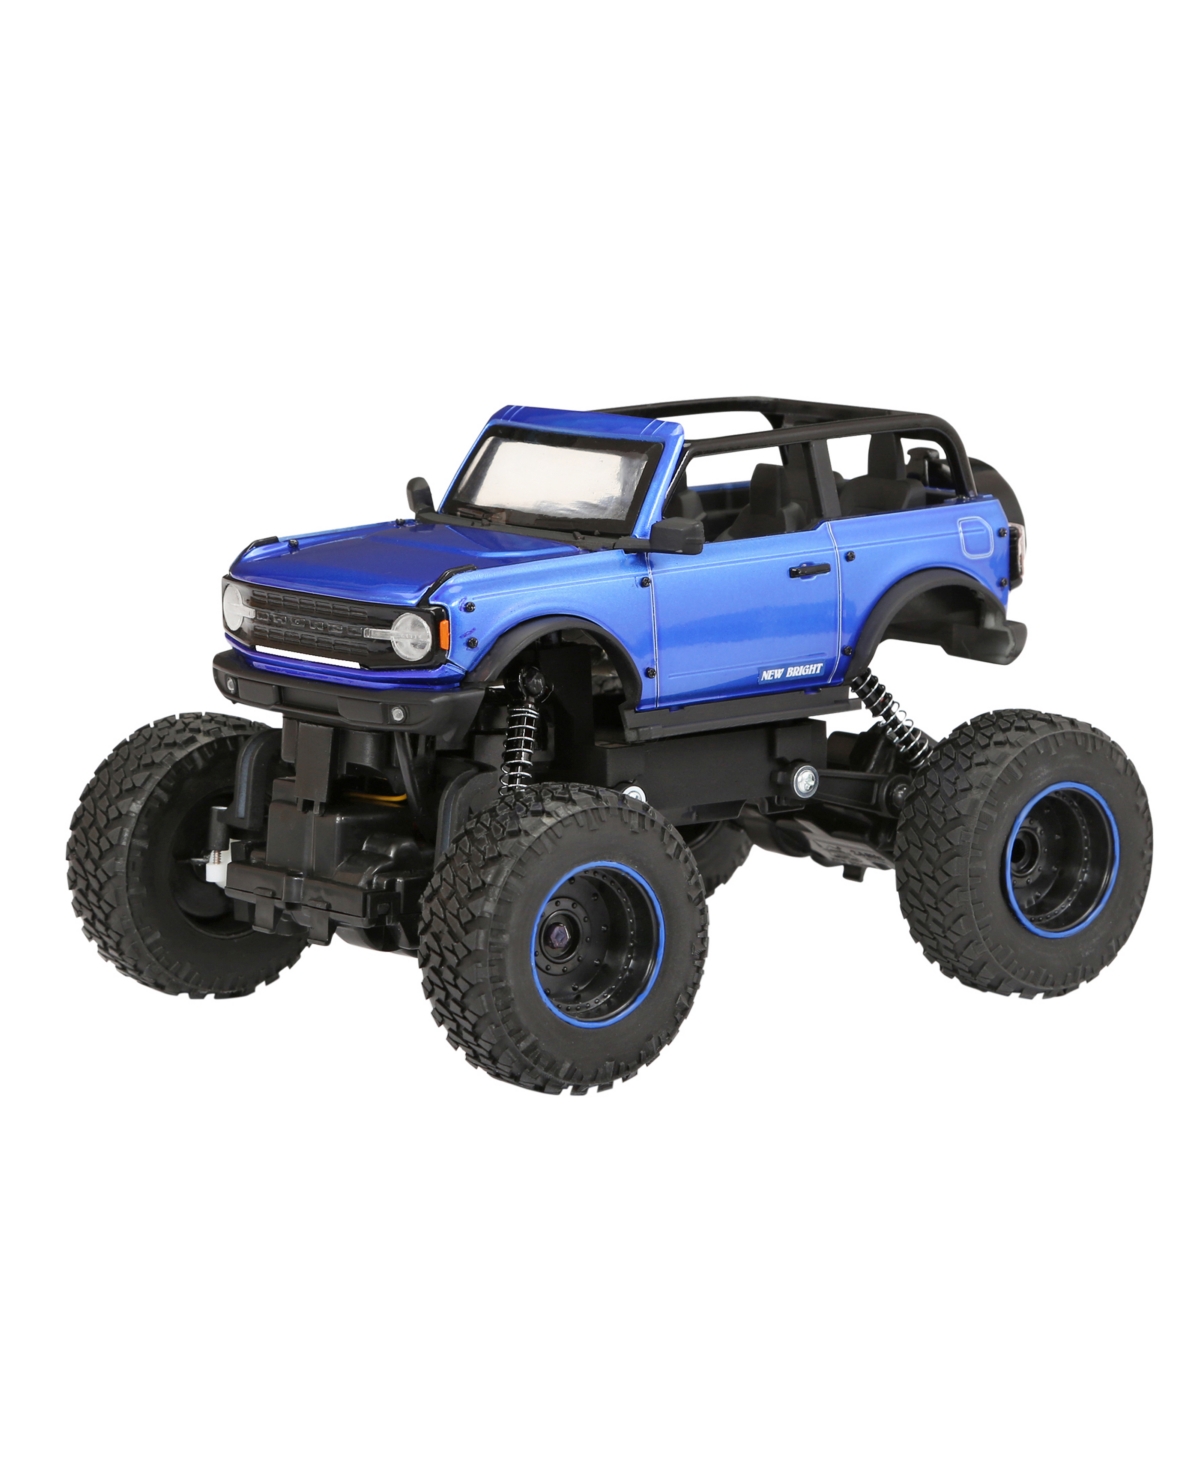 New Bright Kids' 1:18 Rc Metal Ford Bronco Truck In Blue